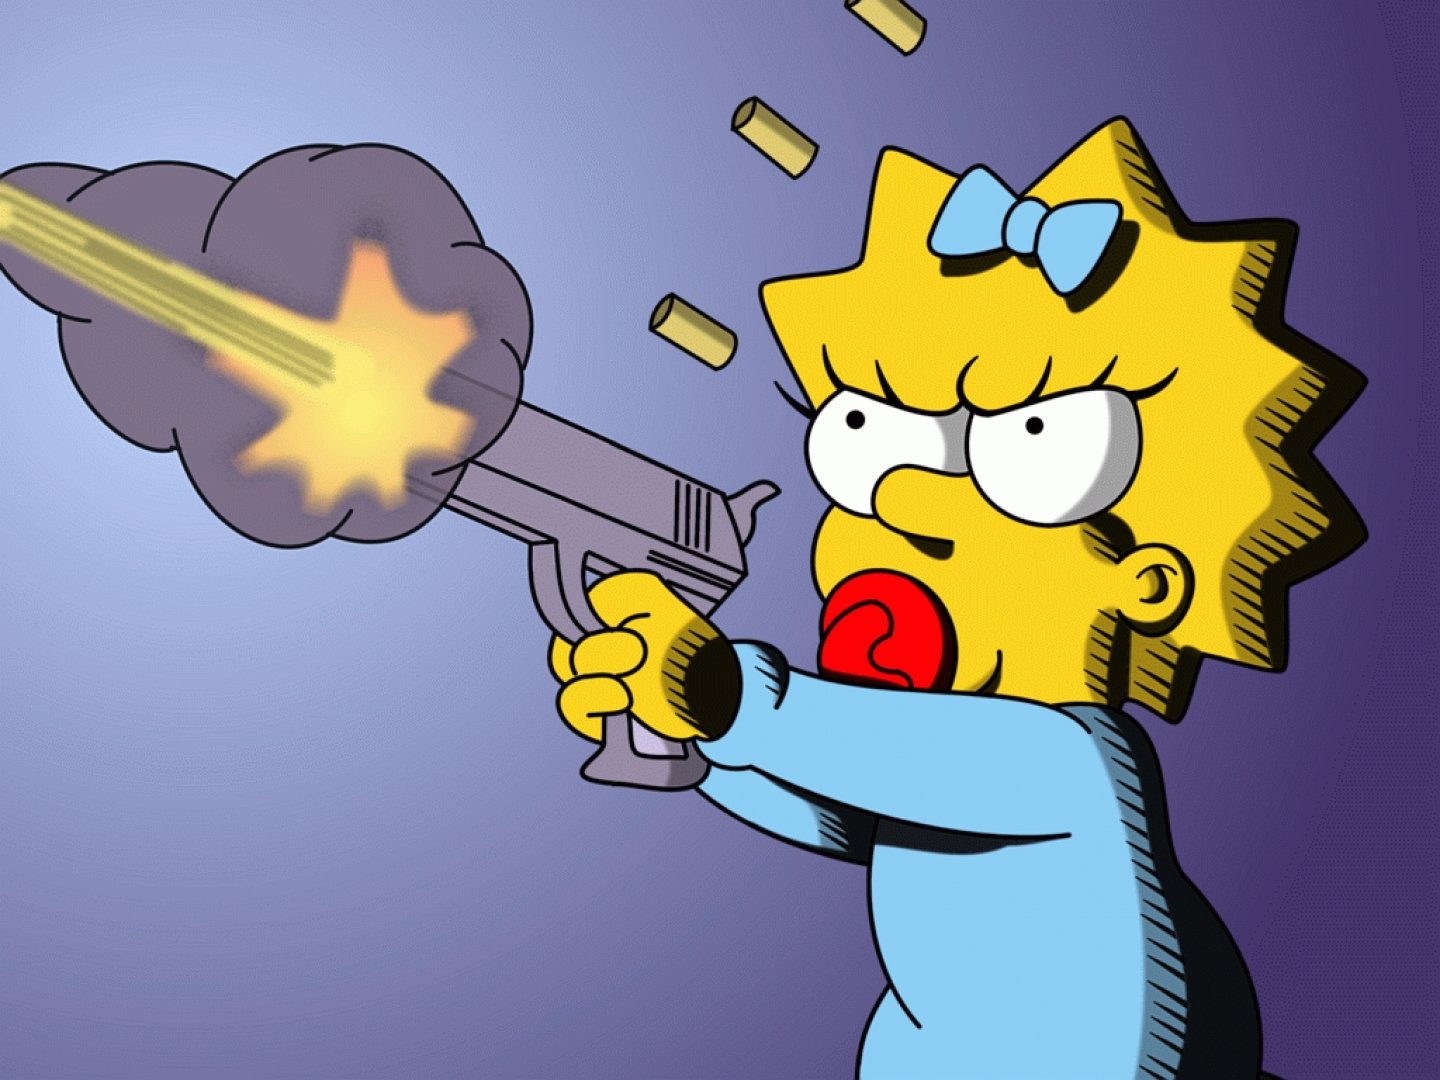 The Simpsons: A Guide to the Iconic Simpson Characters